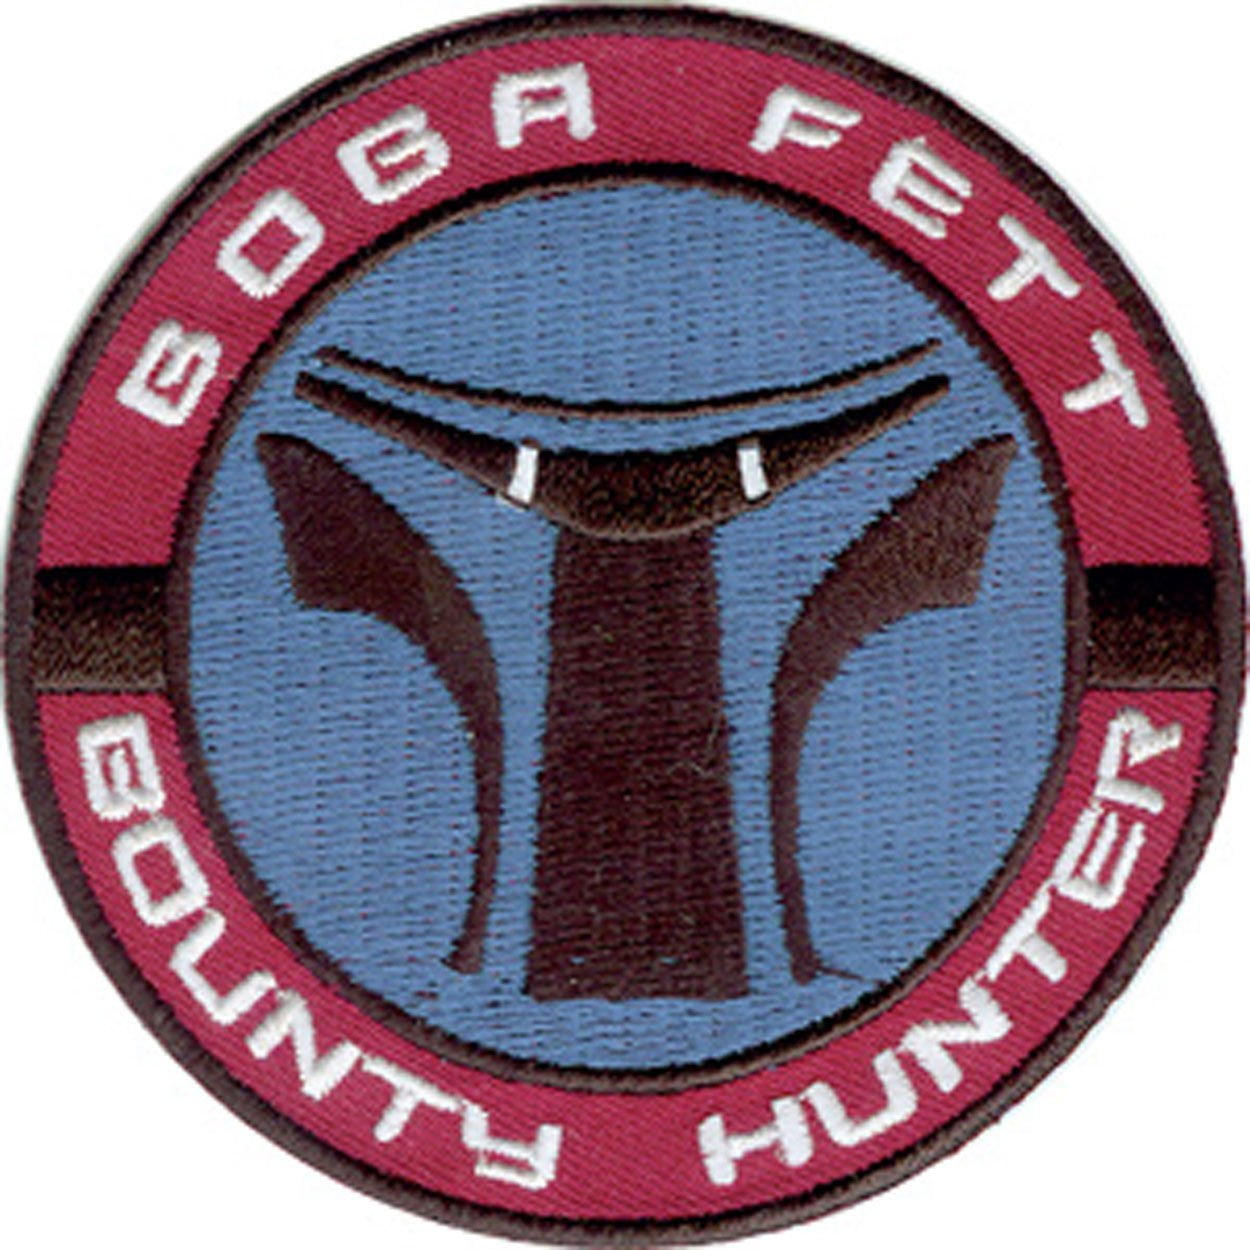 INTERNATIONAL BOUNTY HUNTER POLICE EMBROIDERED PATCH 